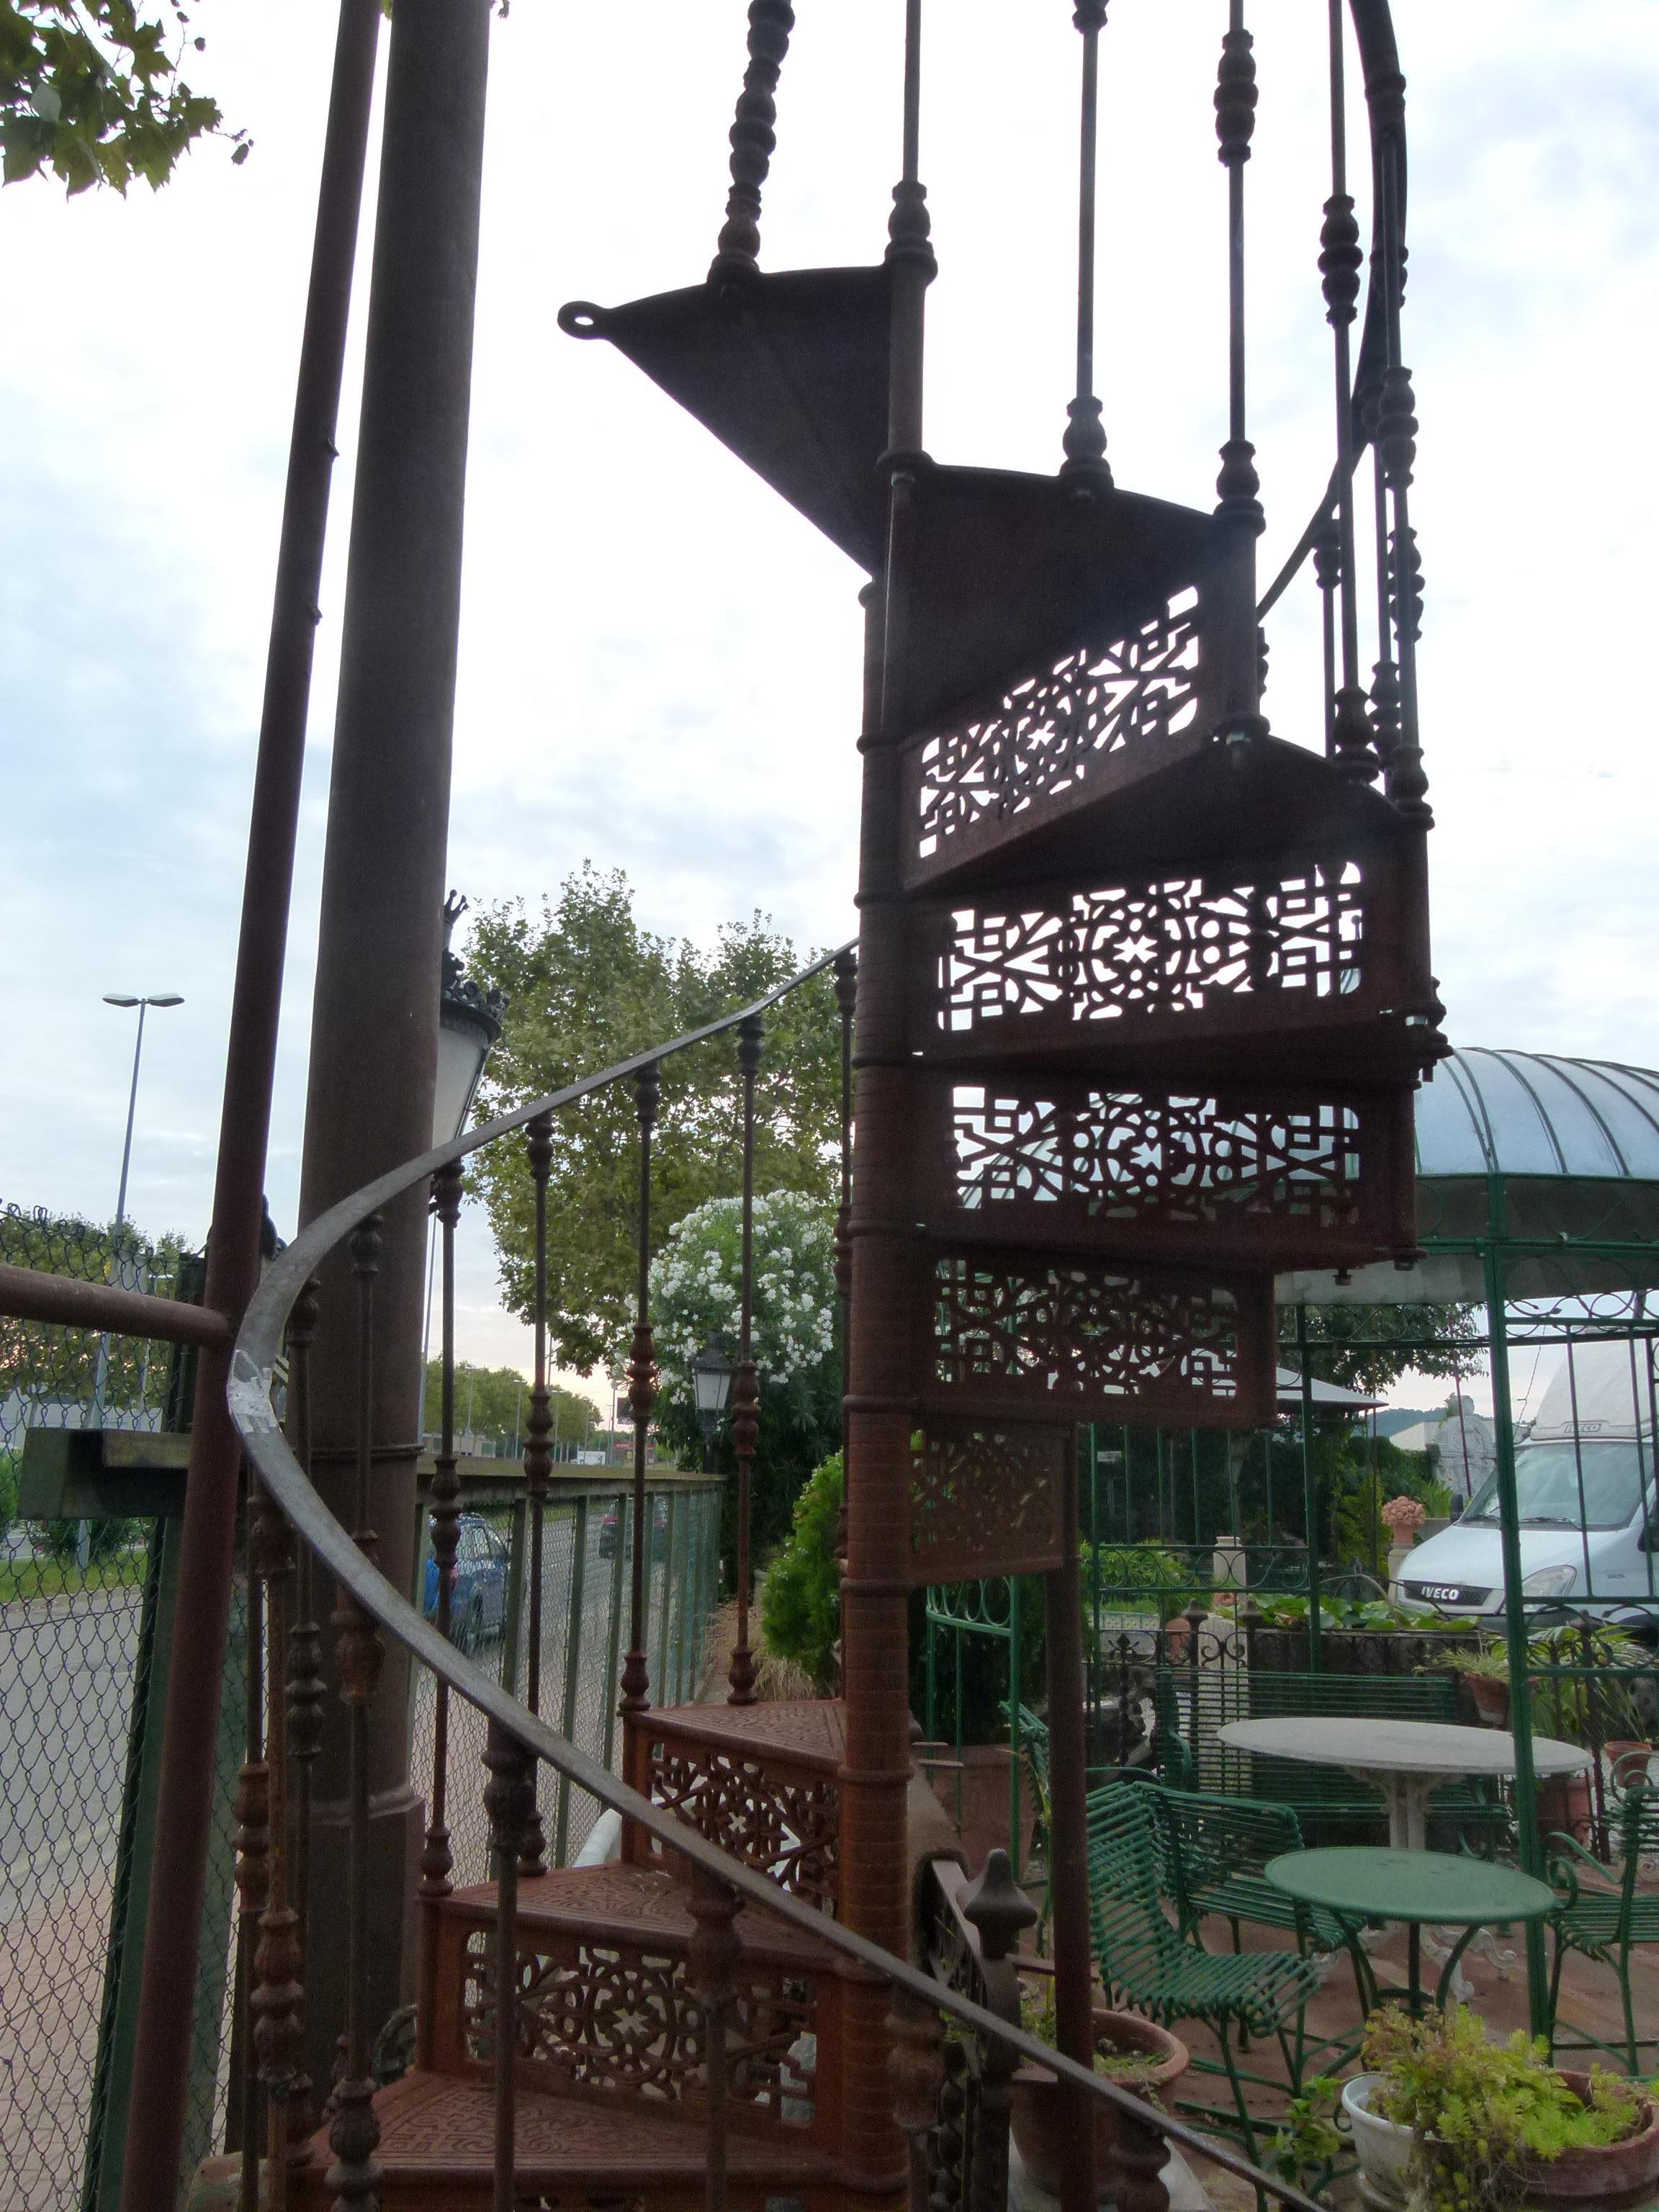 20th century Art Nouveau style spiral staircase from Spain in good condition and easy to assemble. 

This stair belonged to an old Factory in Spain, that closed at the end of the 20th century. 
The rail was missing and added new recently. Steps are